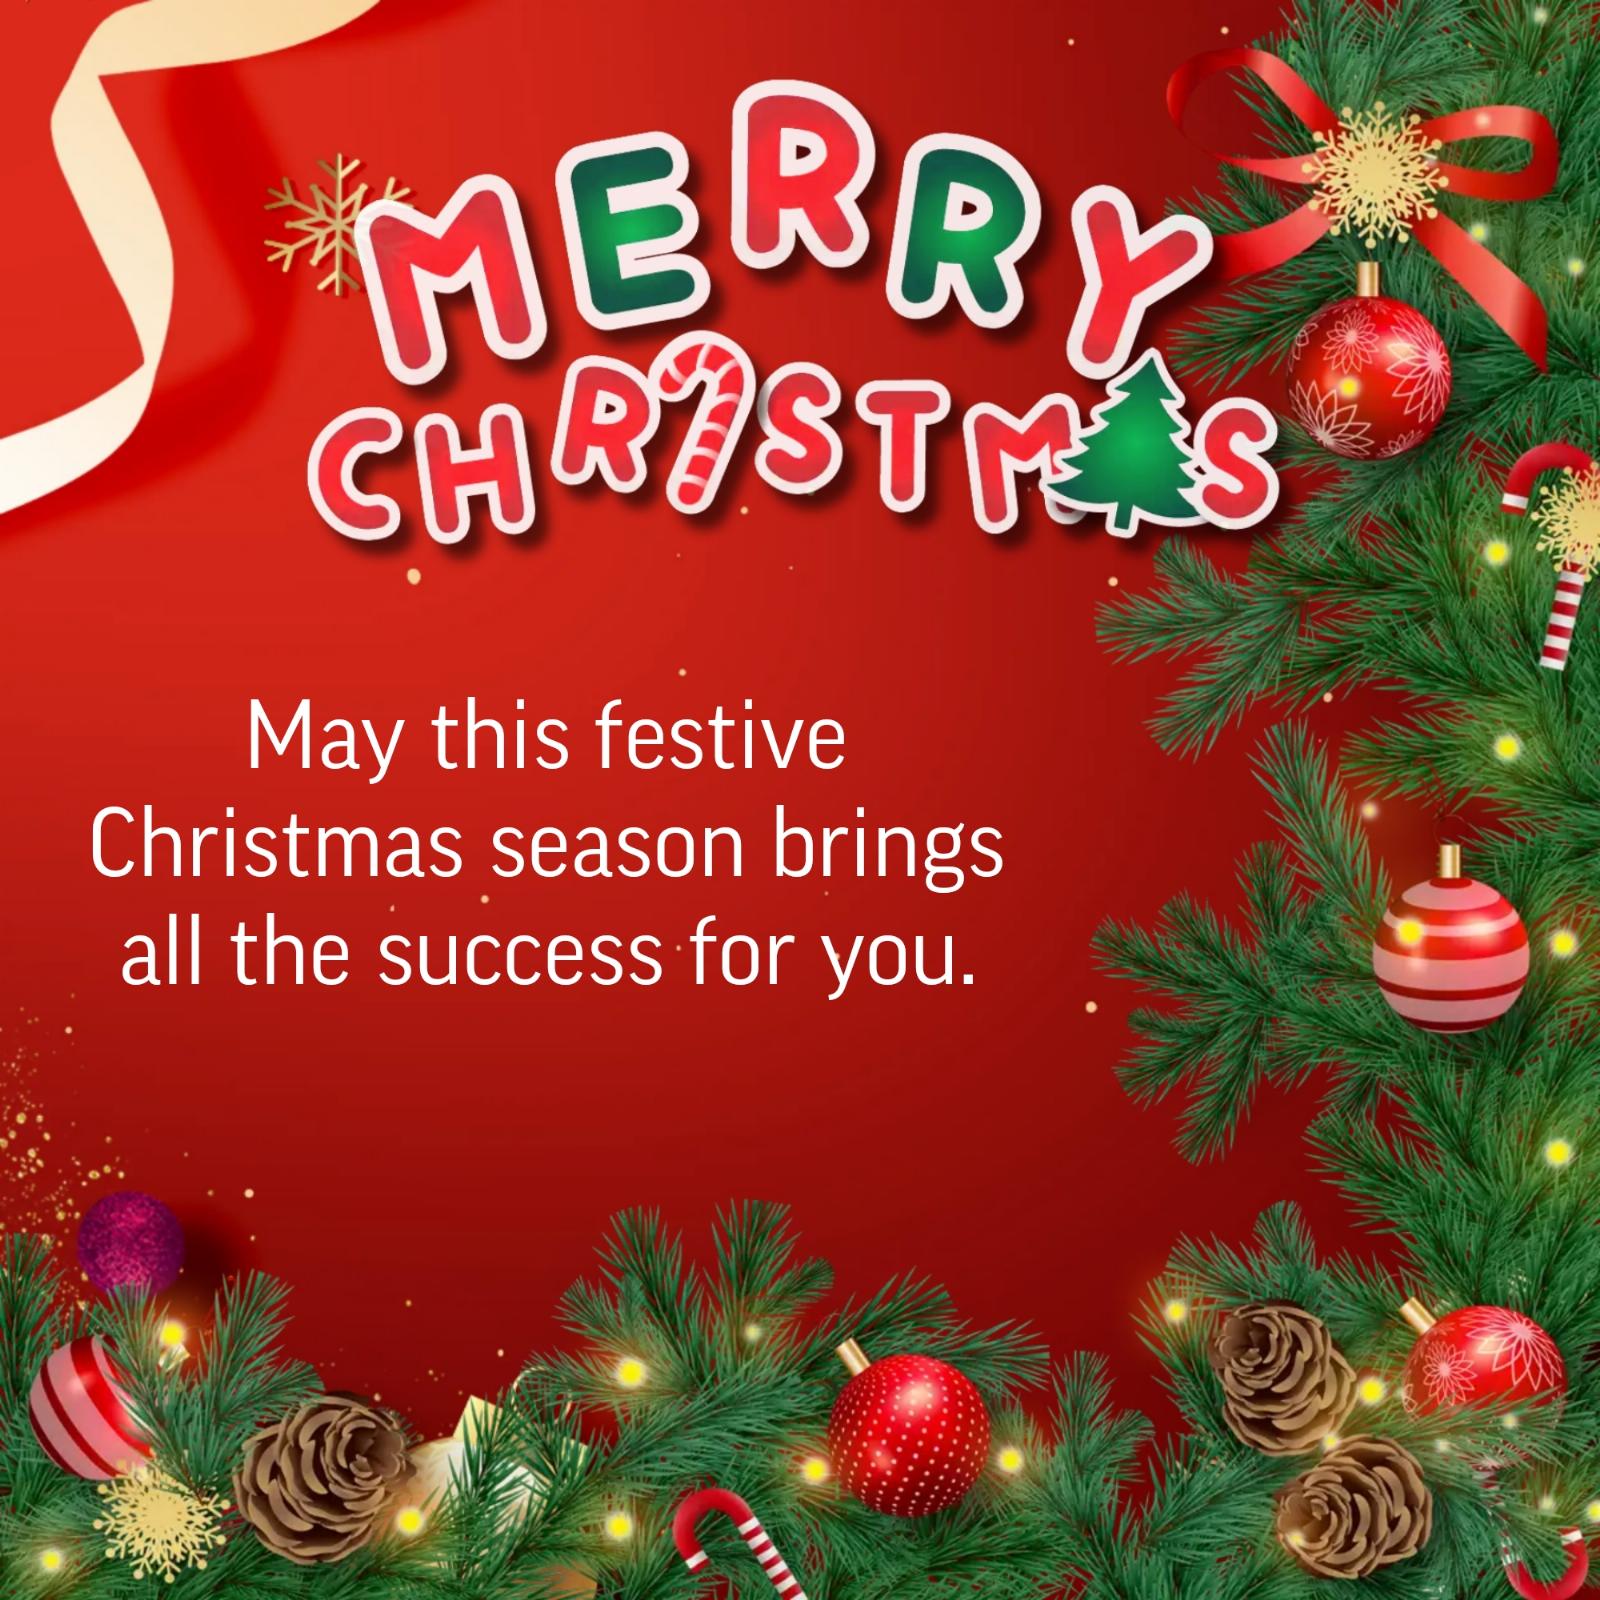 May this festive Christmas season brings all the success for you